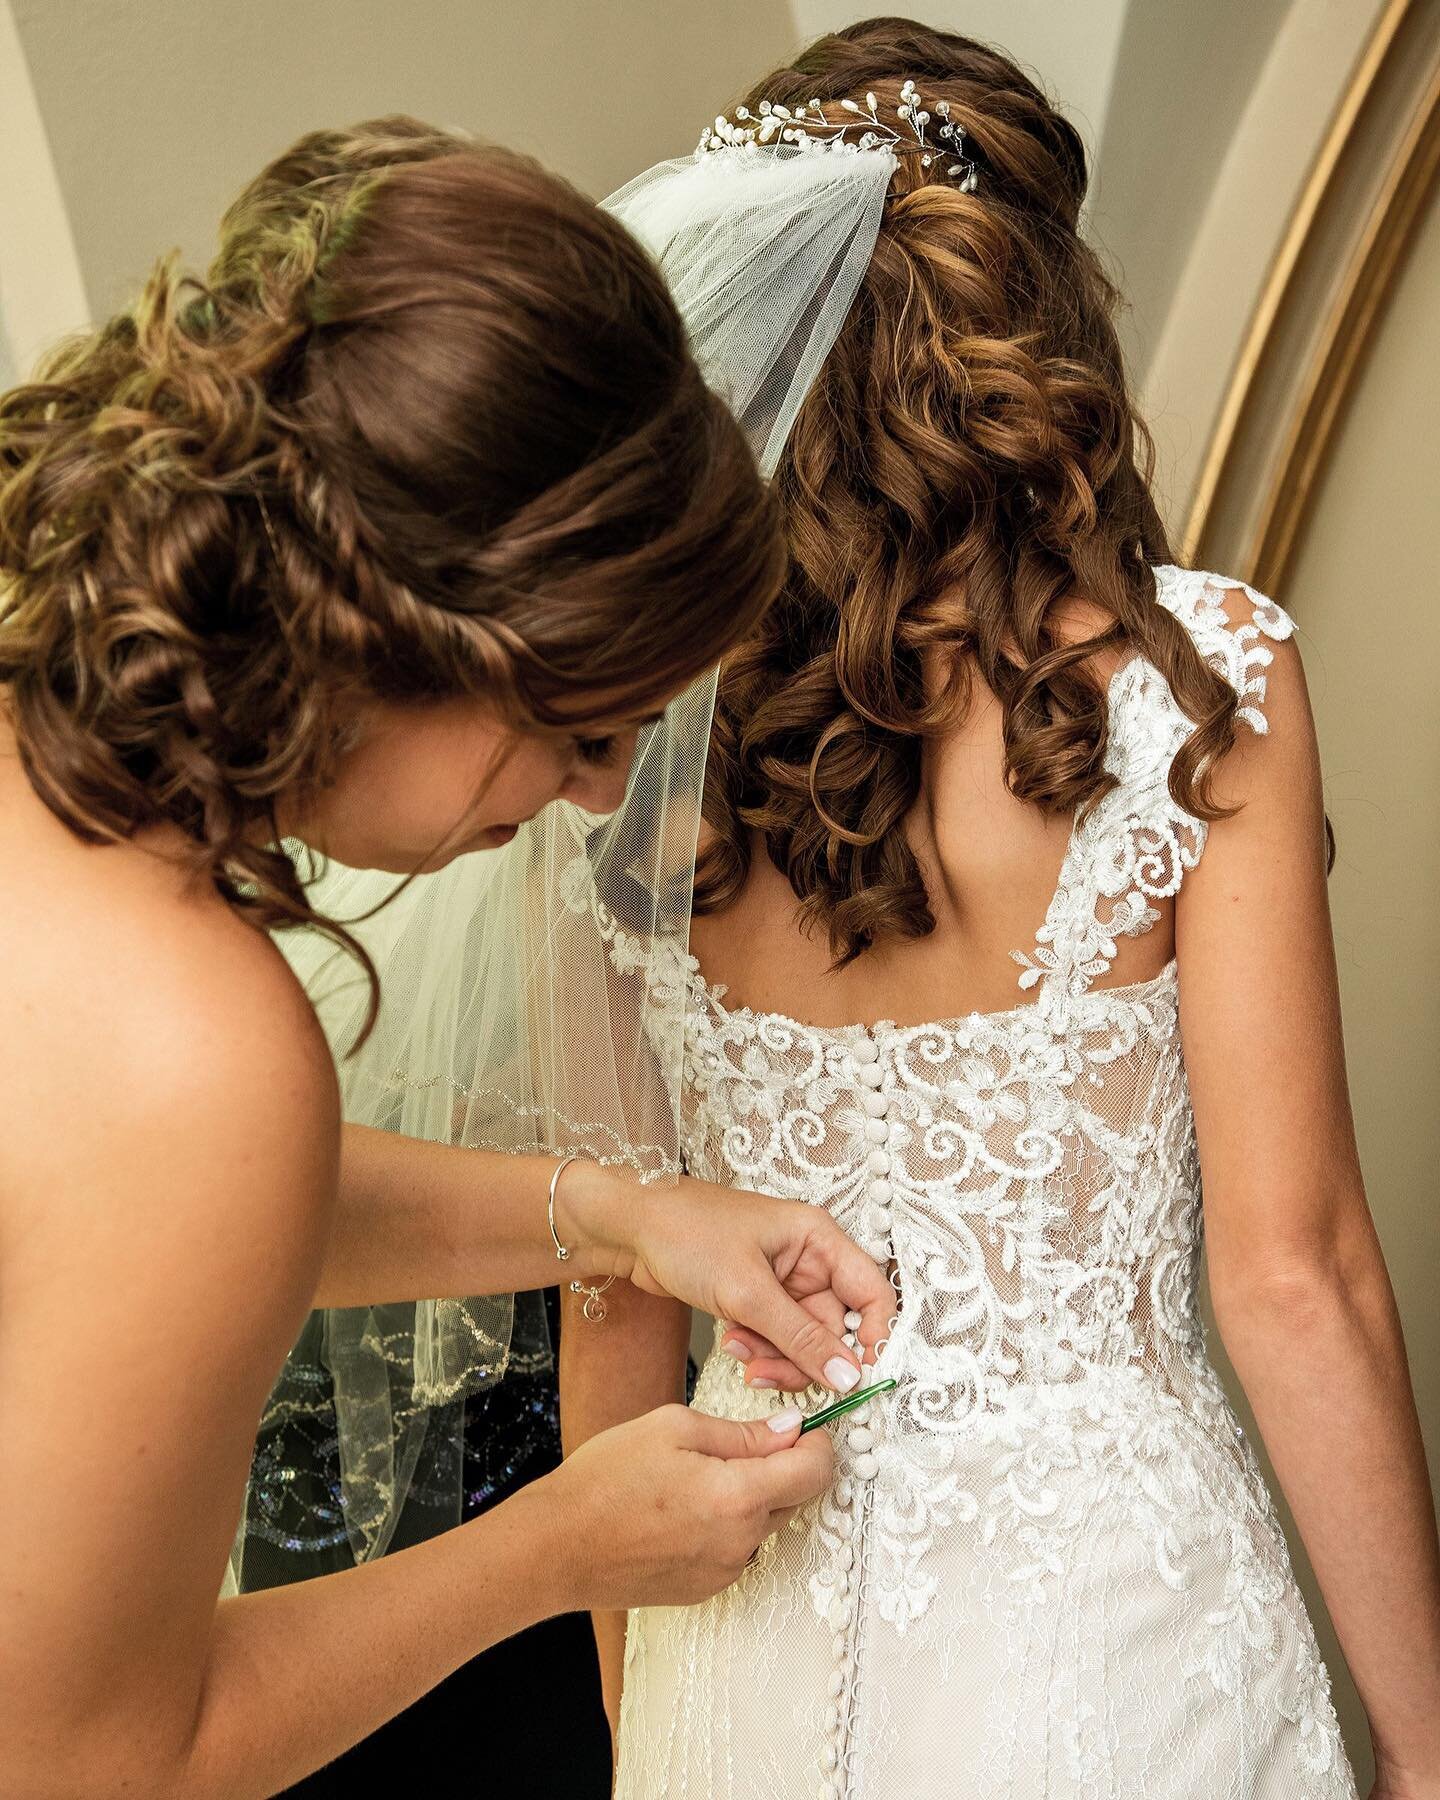 The other day I posted about crochet hooks coming in handy for button wedding dresses. Here is one being used at Chelsea&rsquo;s wedding! If you want to save a lot of time I highly recommend picking one up at hobby lobby or Walmart before your big da